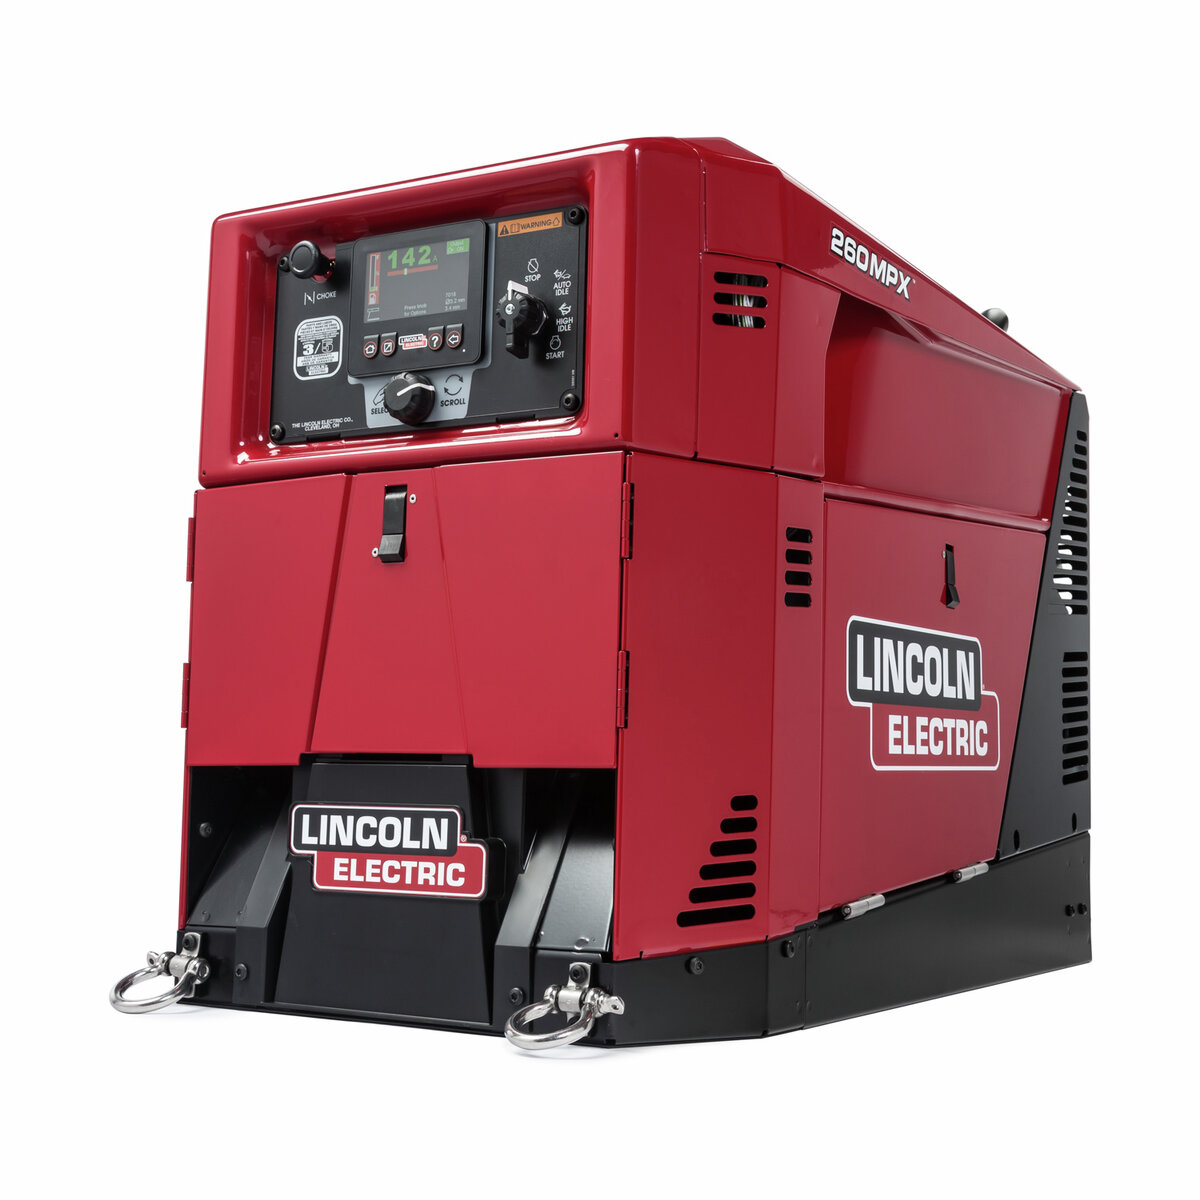 Premium welder/generator with excellent multi-process capability for stick, TIG, MIG while providing clean AC generator output.